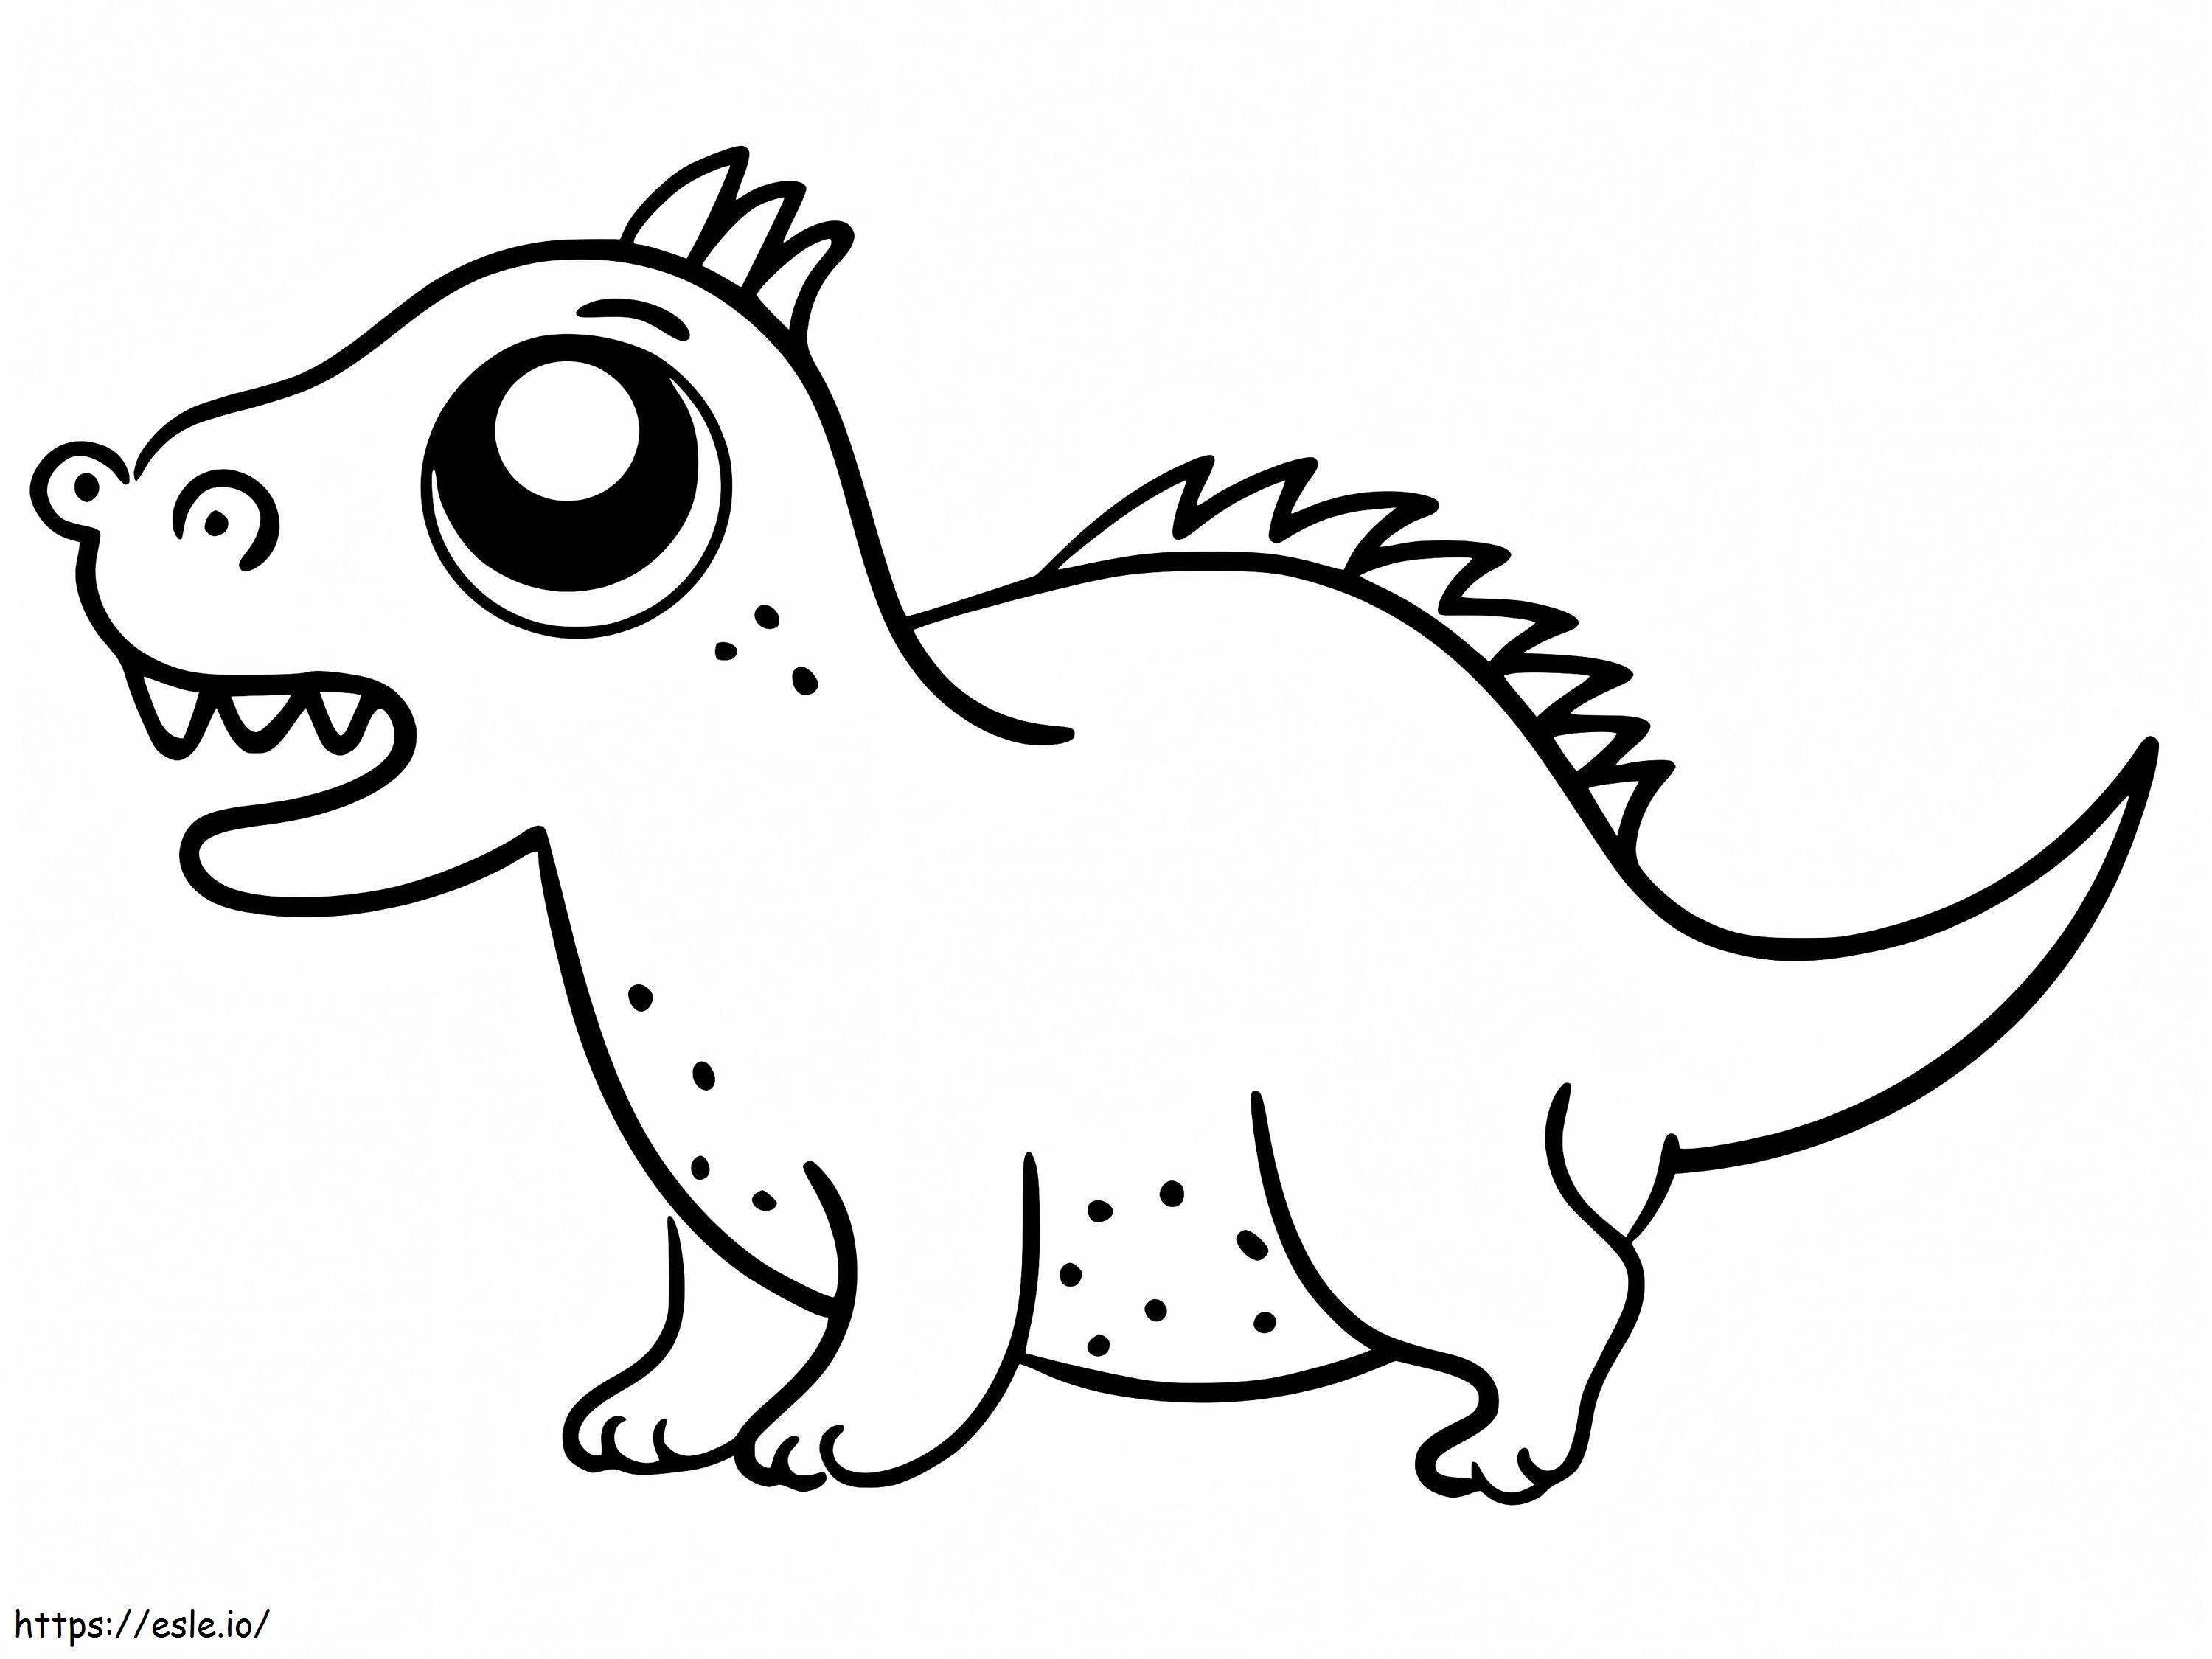 Dinosaur With A Big Belly coloring page